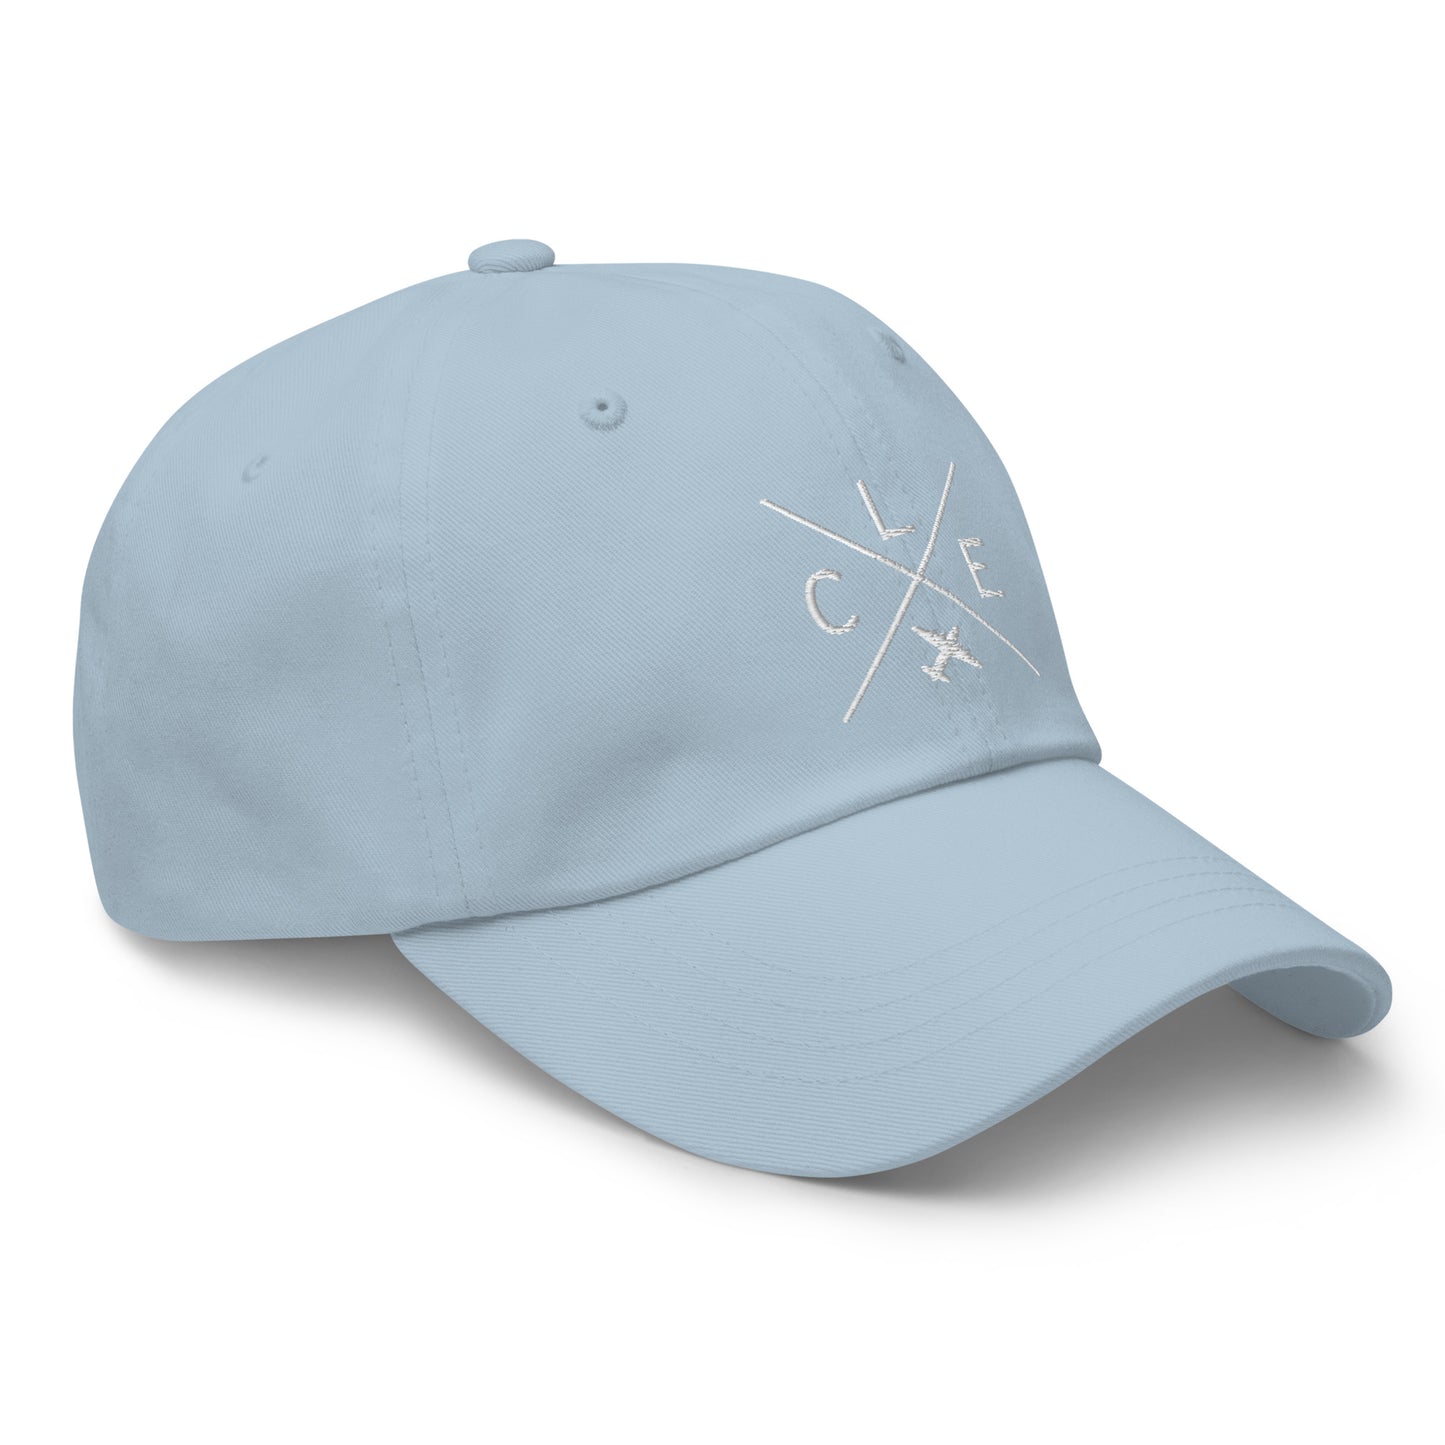 Crossed-X Dad Hat - White • CLE Cleveland • YHM Designs - Image 29